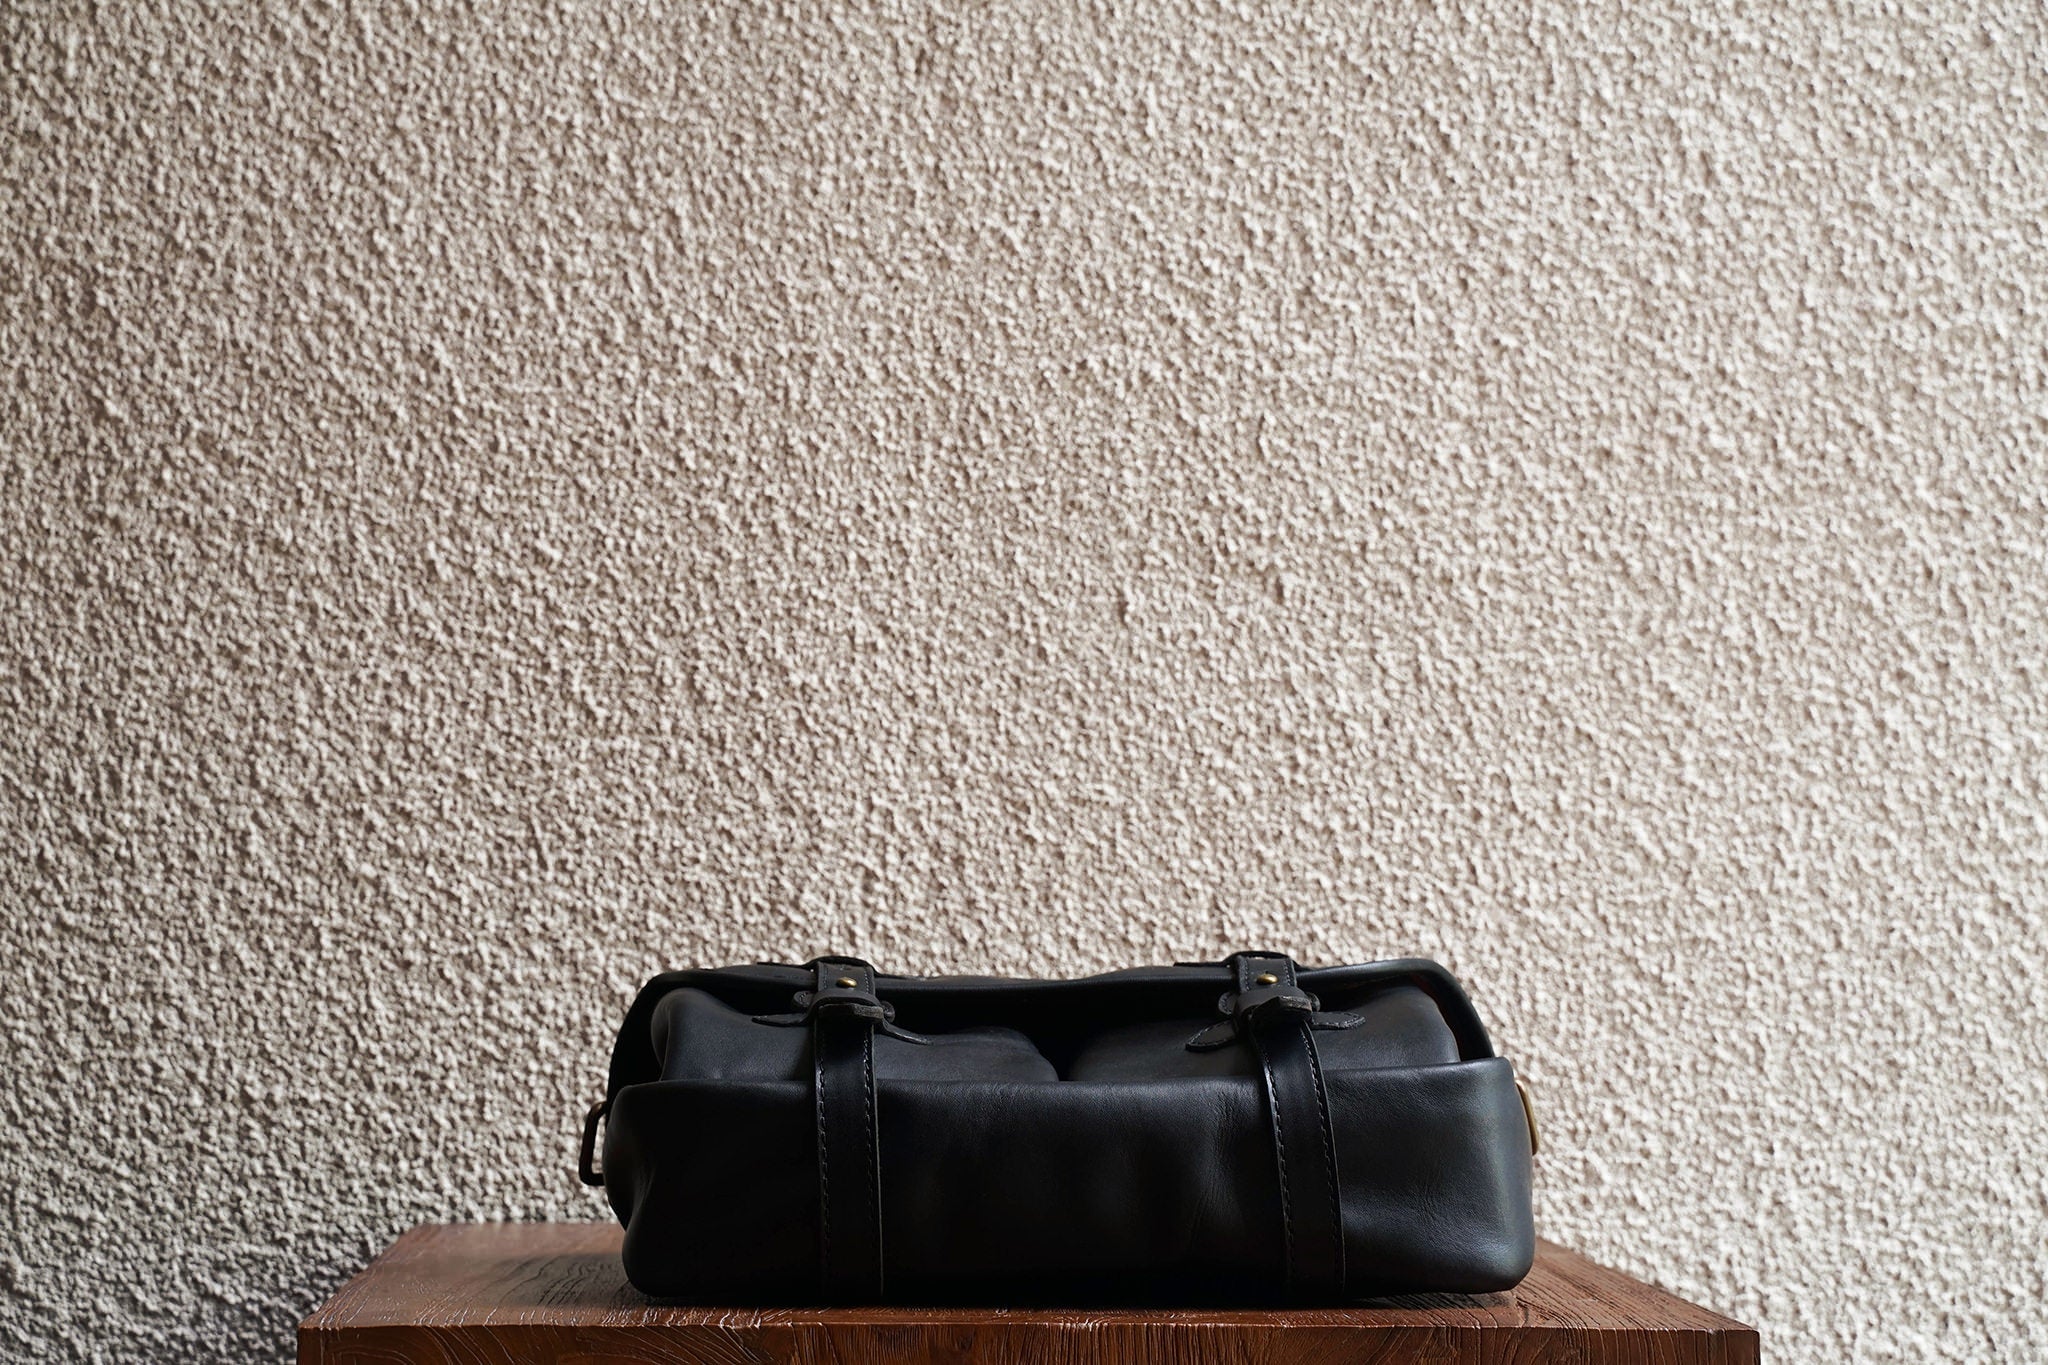 One of our signature design cues, the body straps go all around the bag, providing a load bearing structure for the bag. Keeping with the goal to minimize seams, the sides and bottom are made from one big piece of leather.